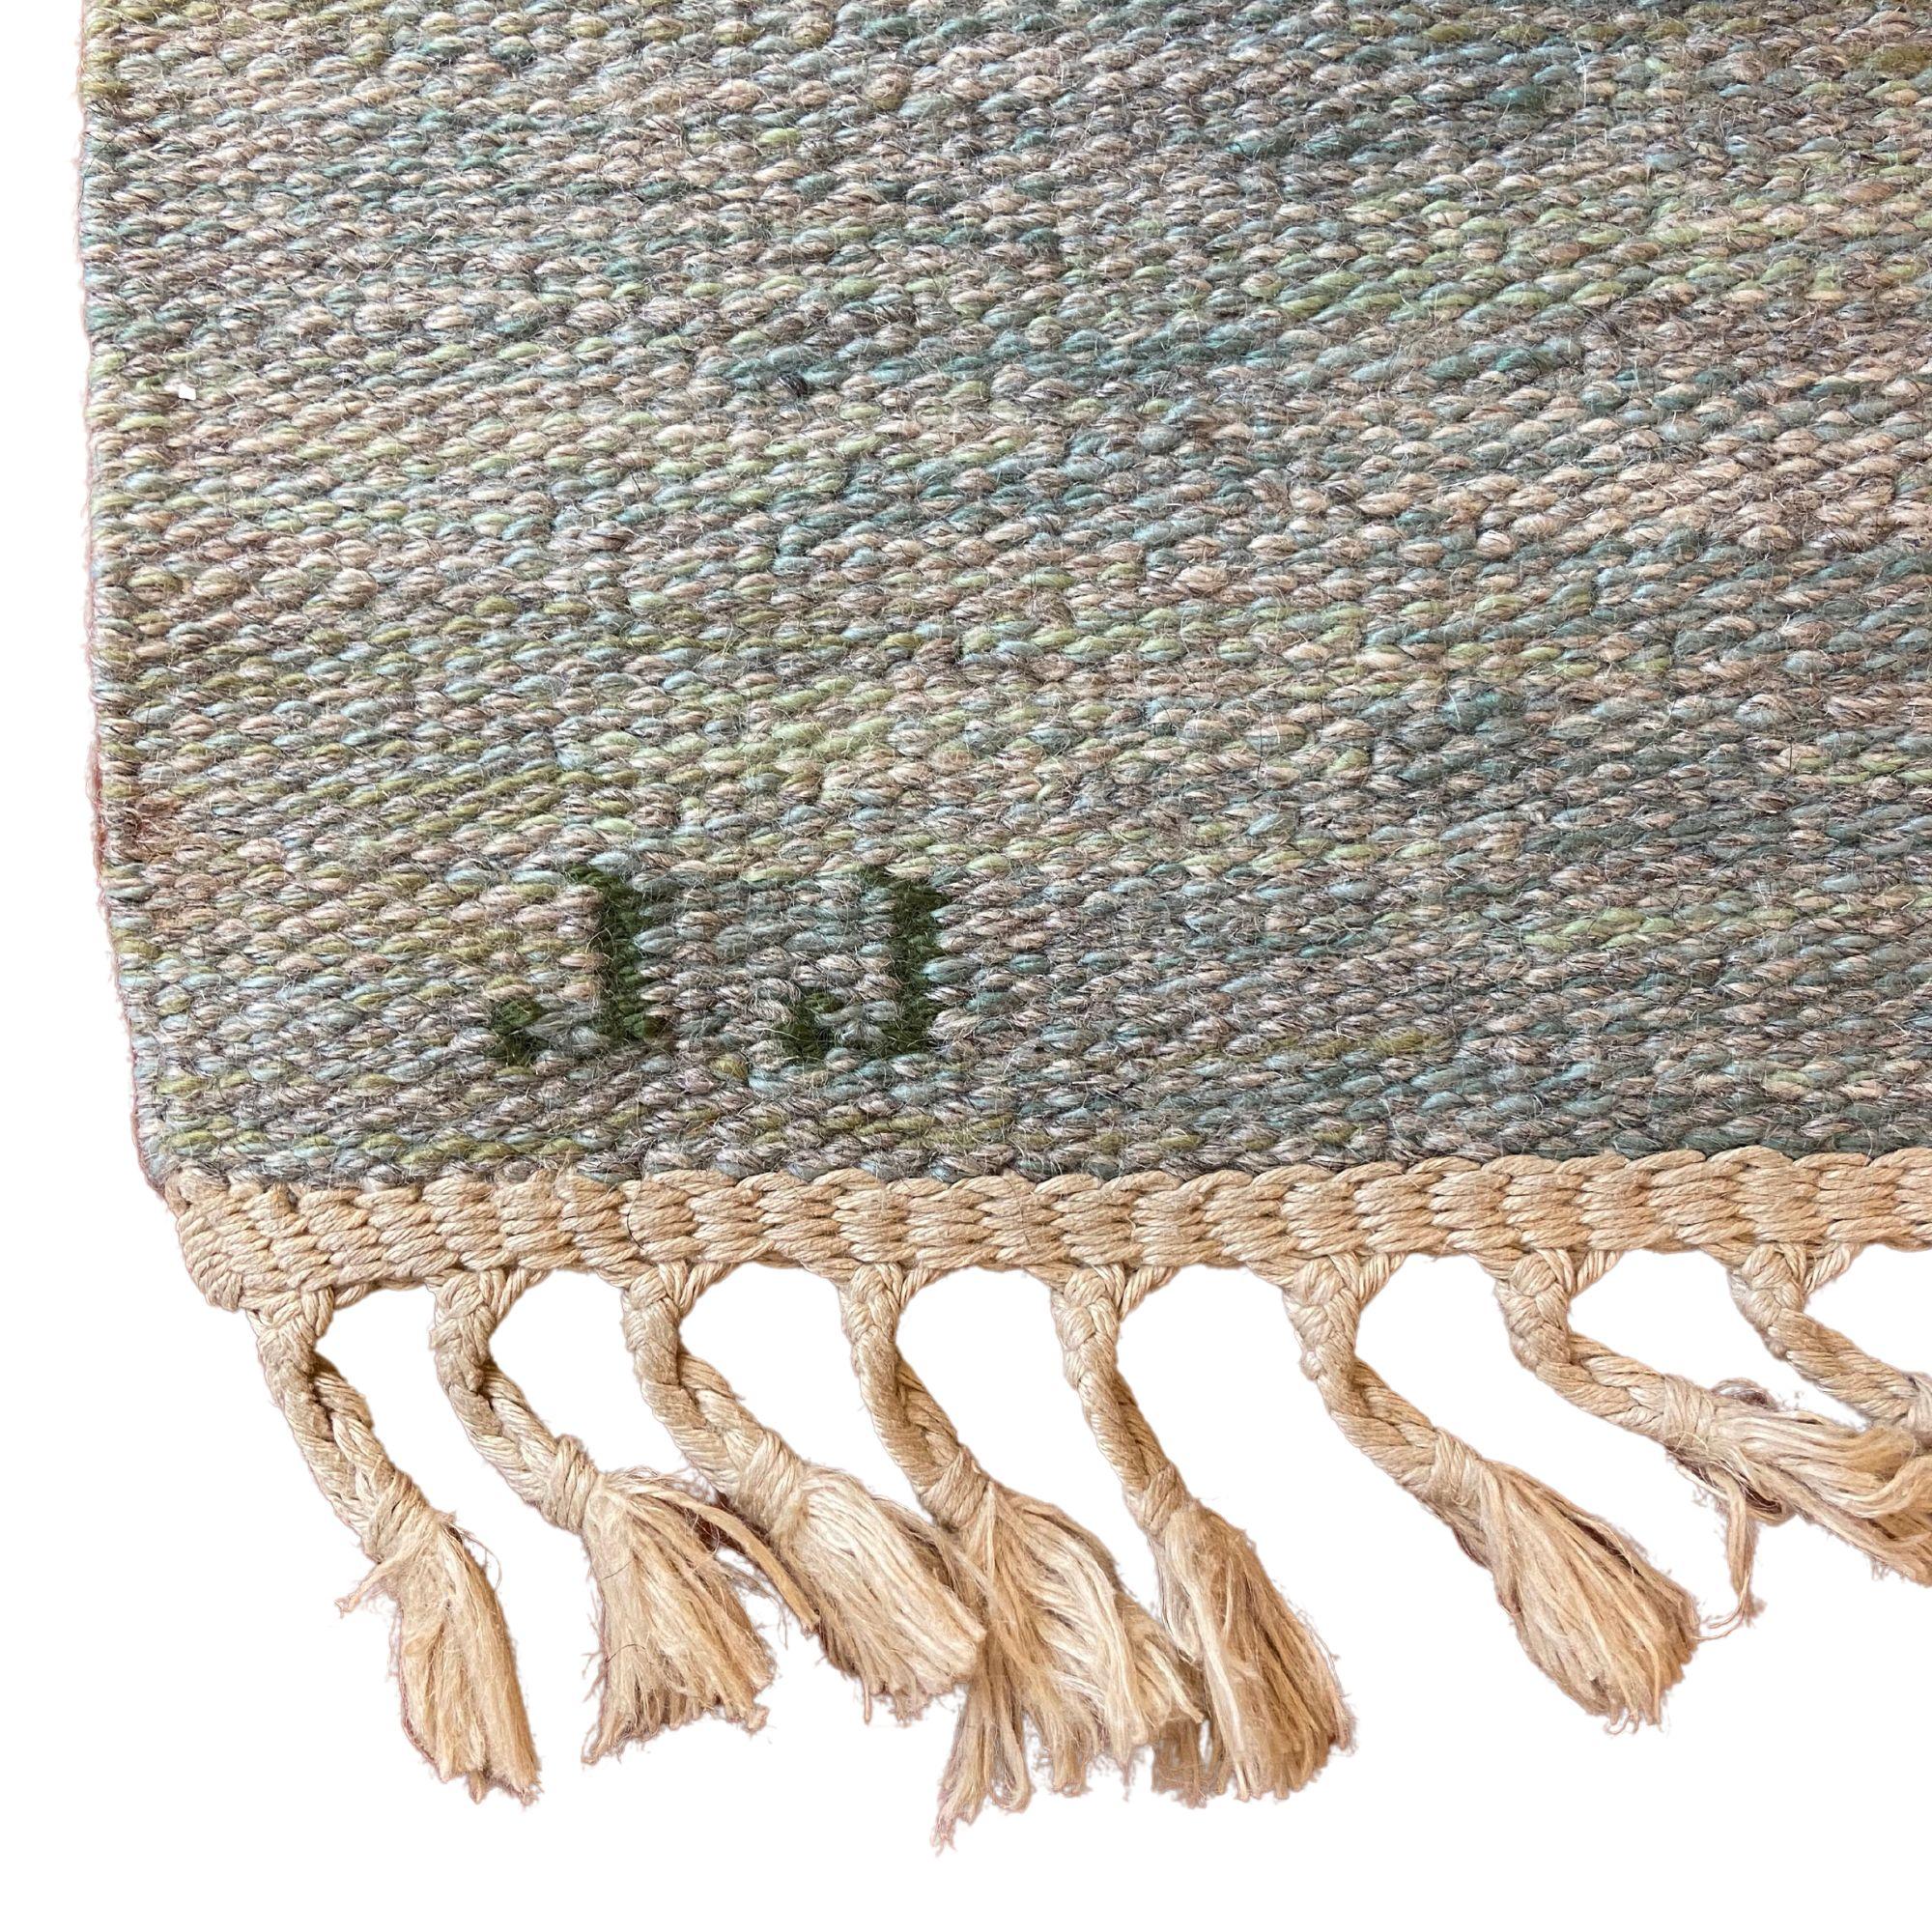 This unique Scandinavian rug was hand-woven by renowned weaver and textile artist, Judith Johansson in Sweden circa 1955. Features woven signature, ‘JJ’, to edge.